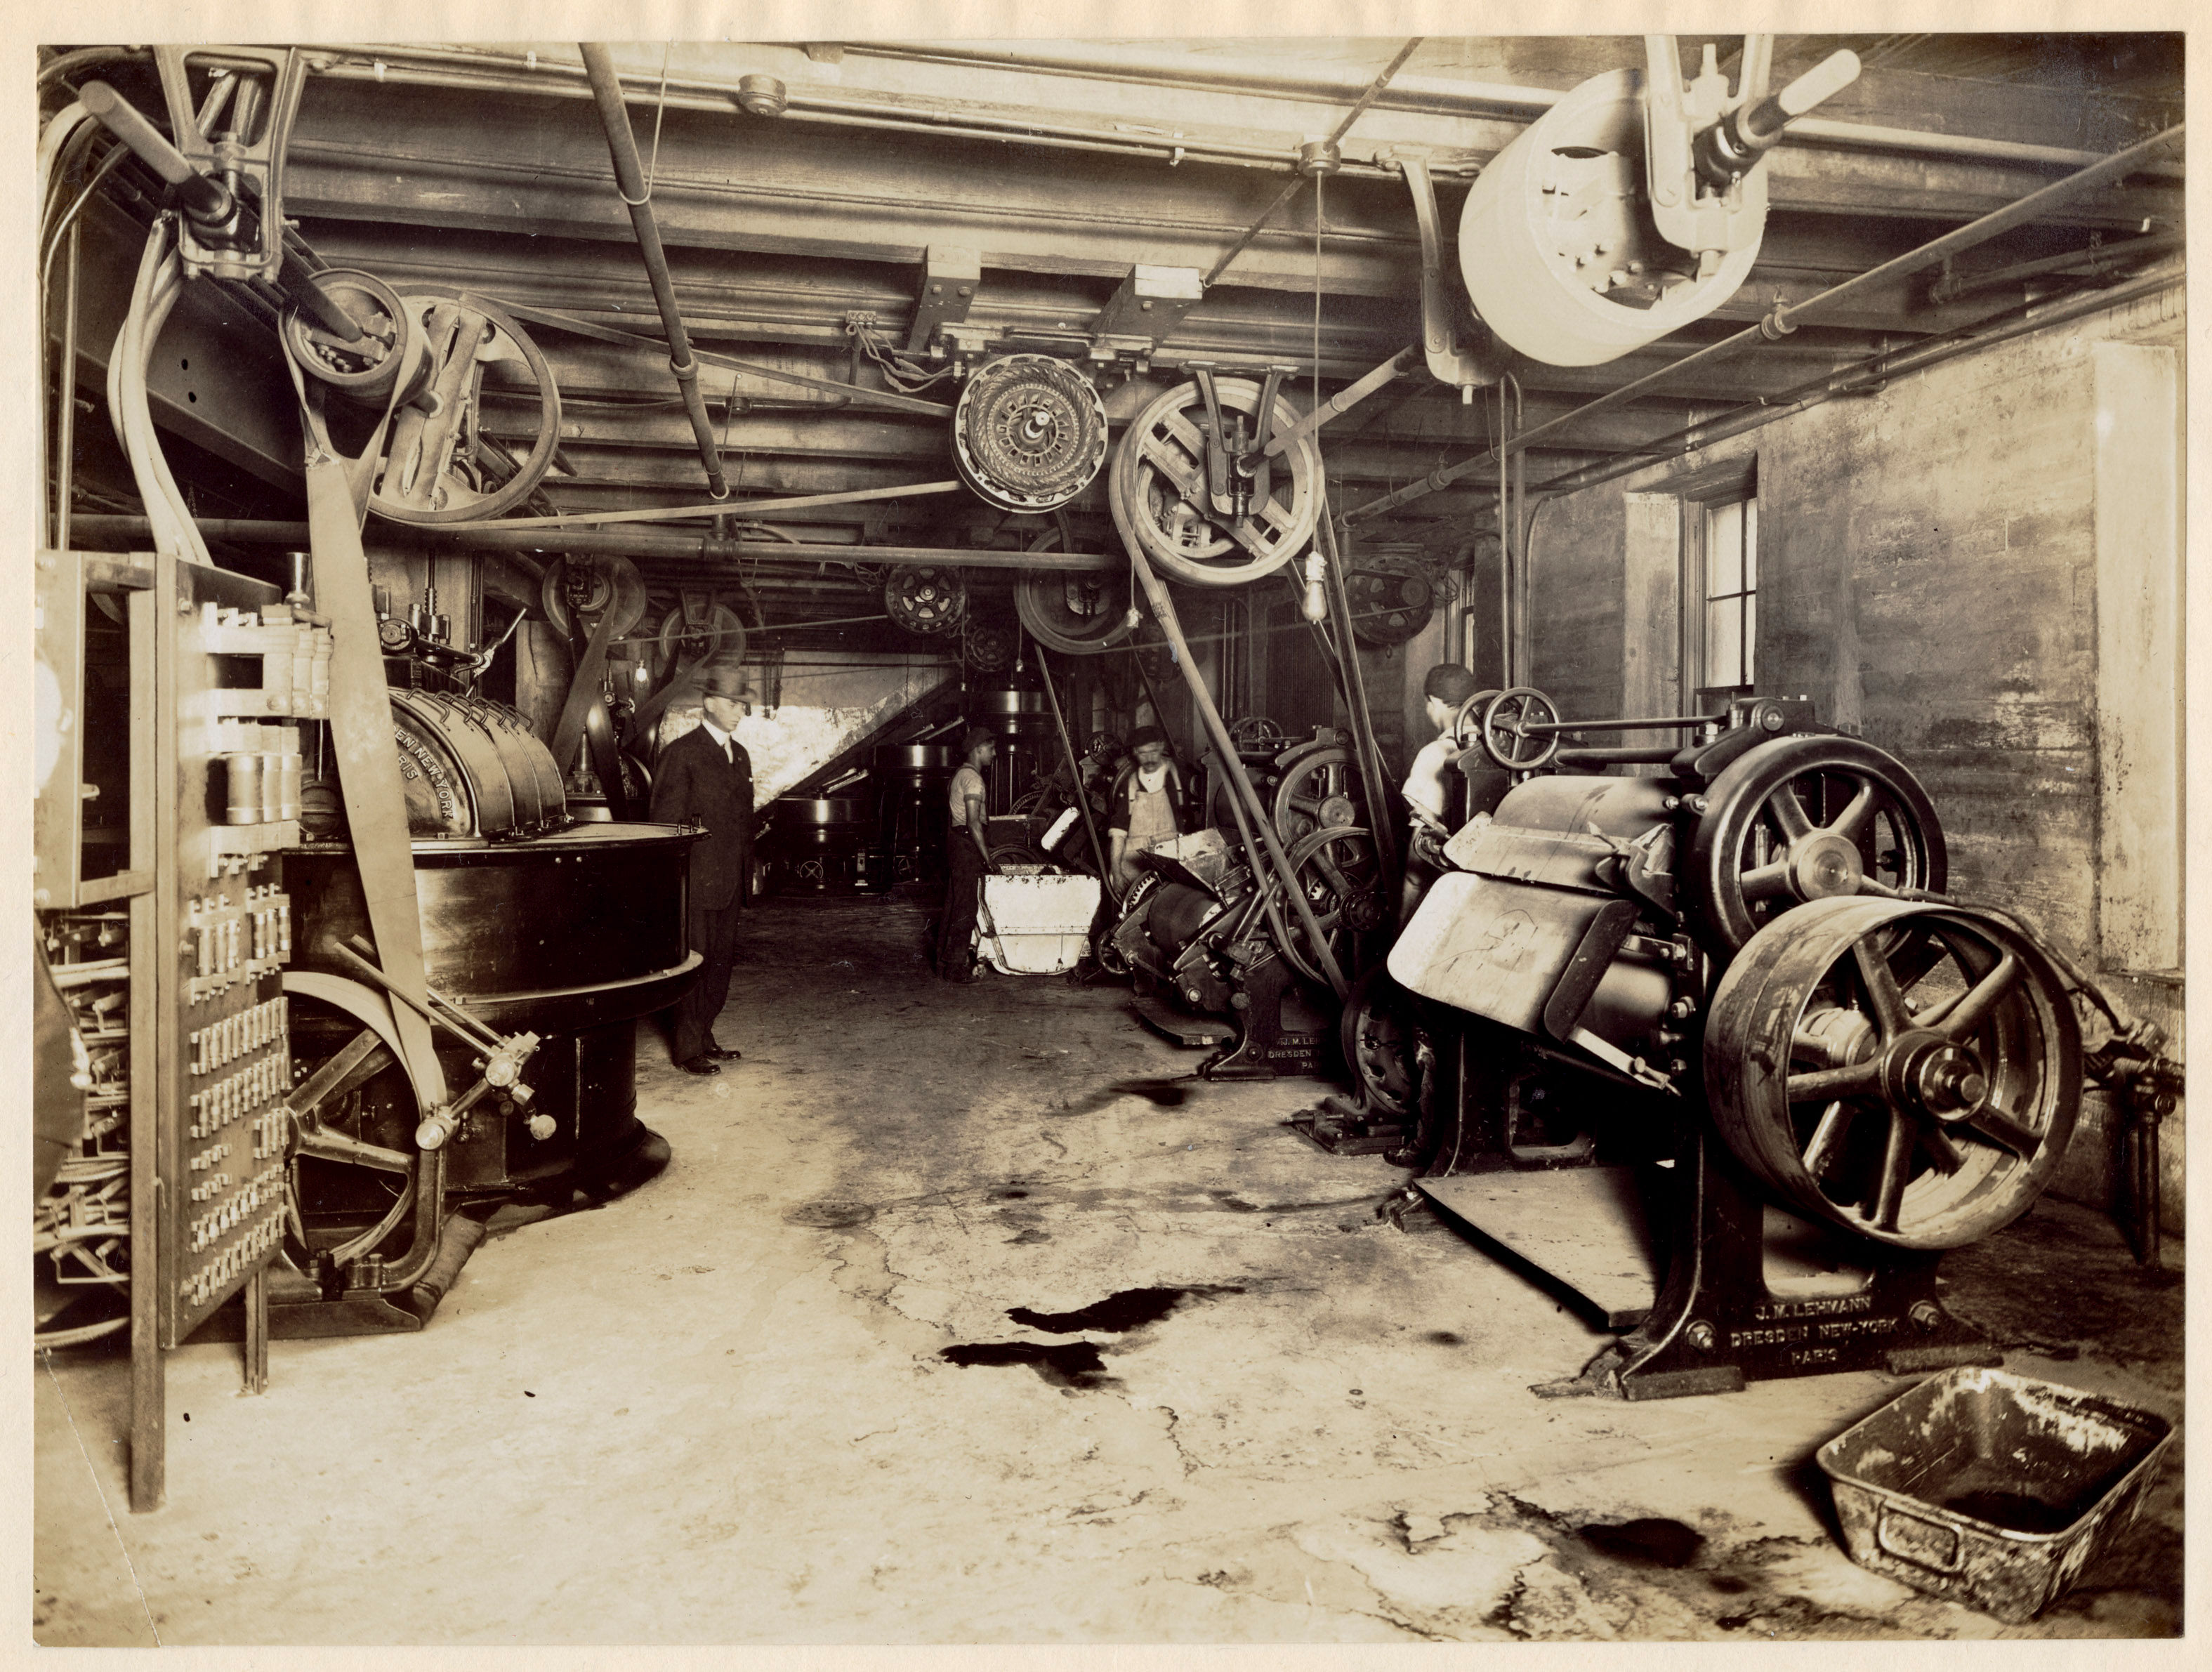 An old photography during the period of the 4th industrial revolution that shows a factory.